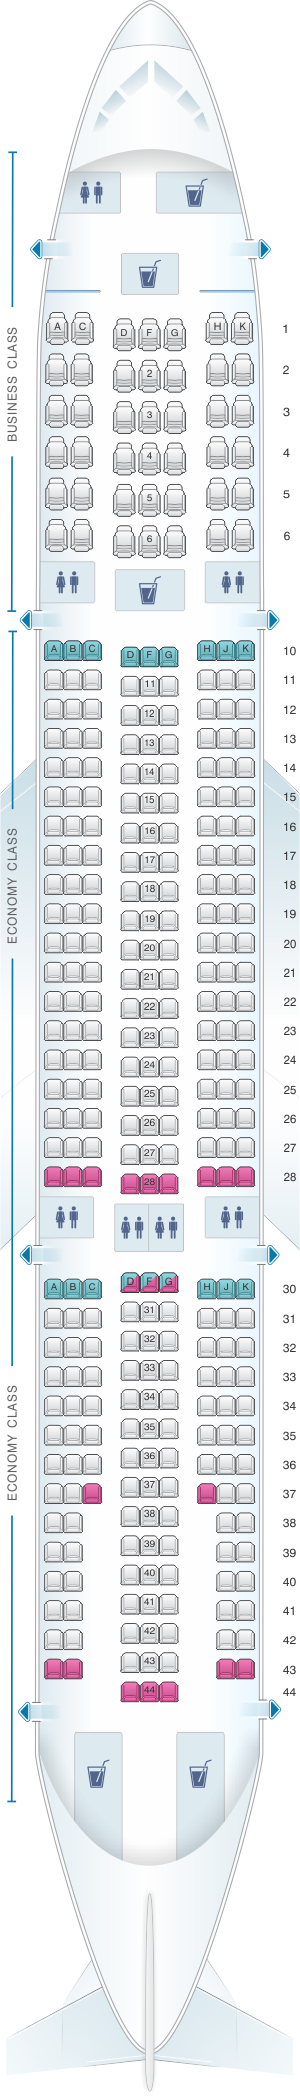 Seat map for Hi Fly Airbus A330 200 330pax